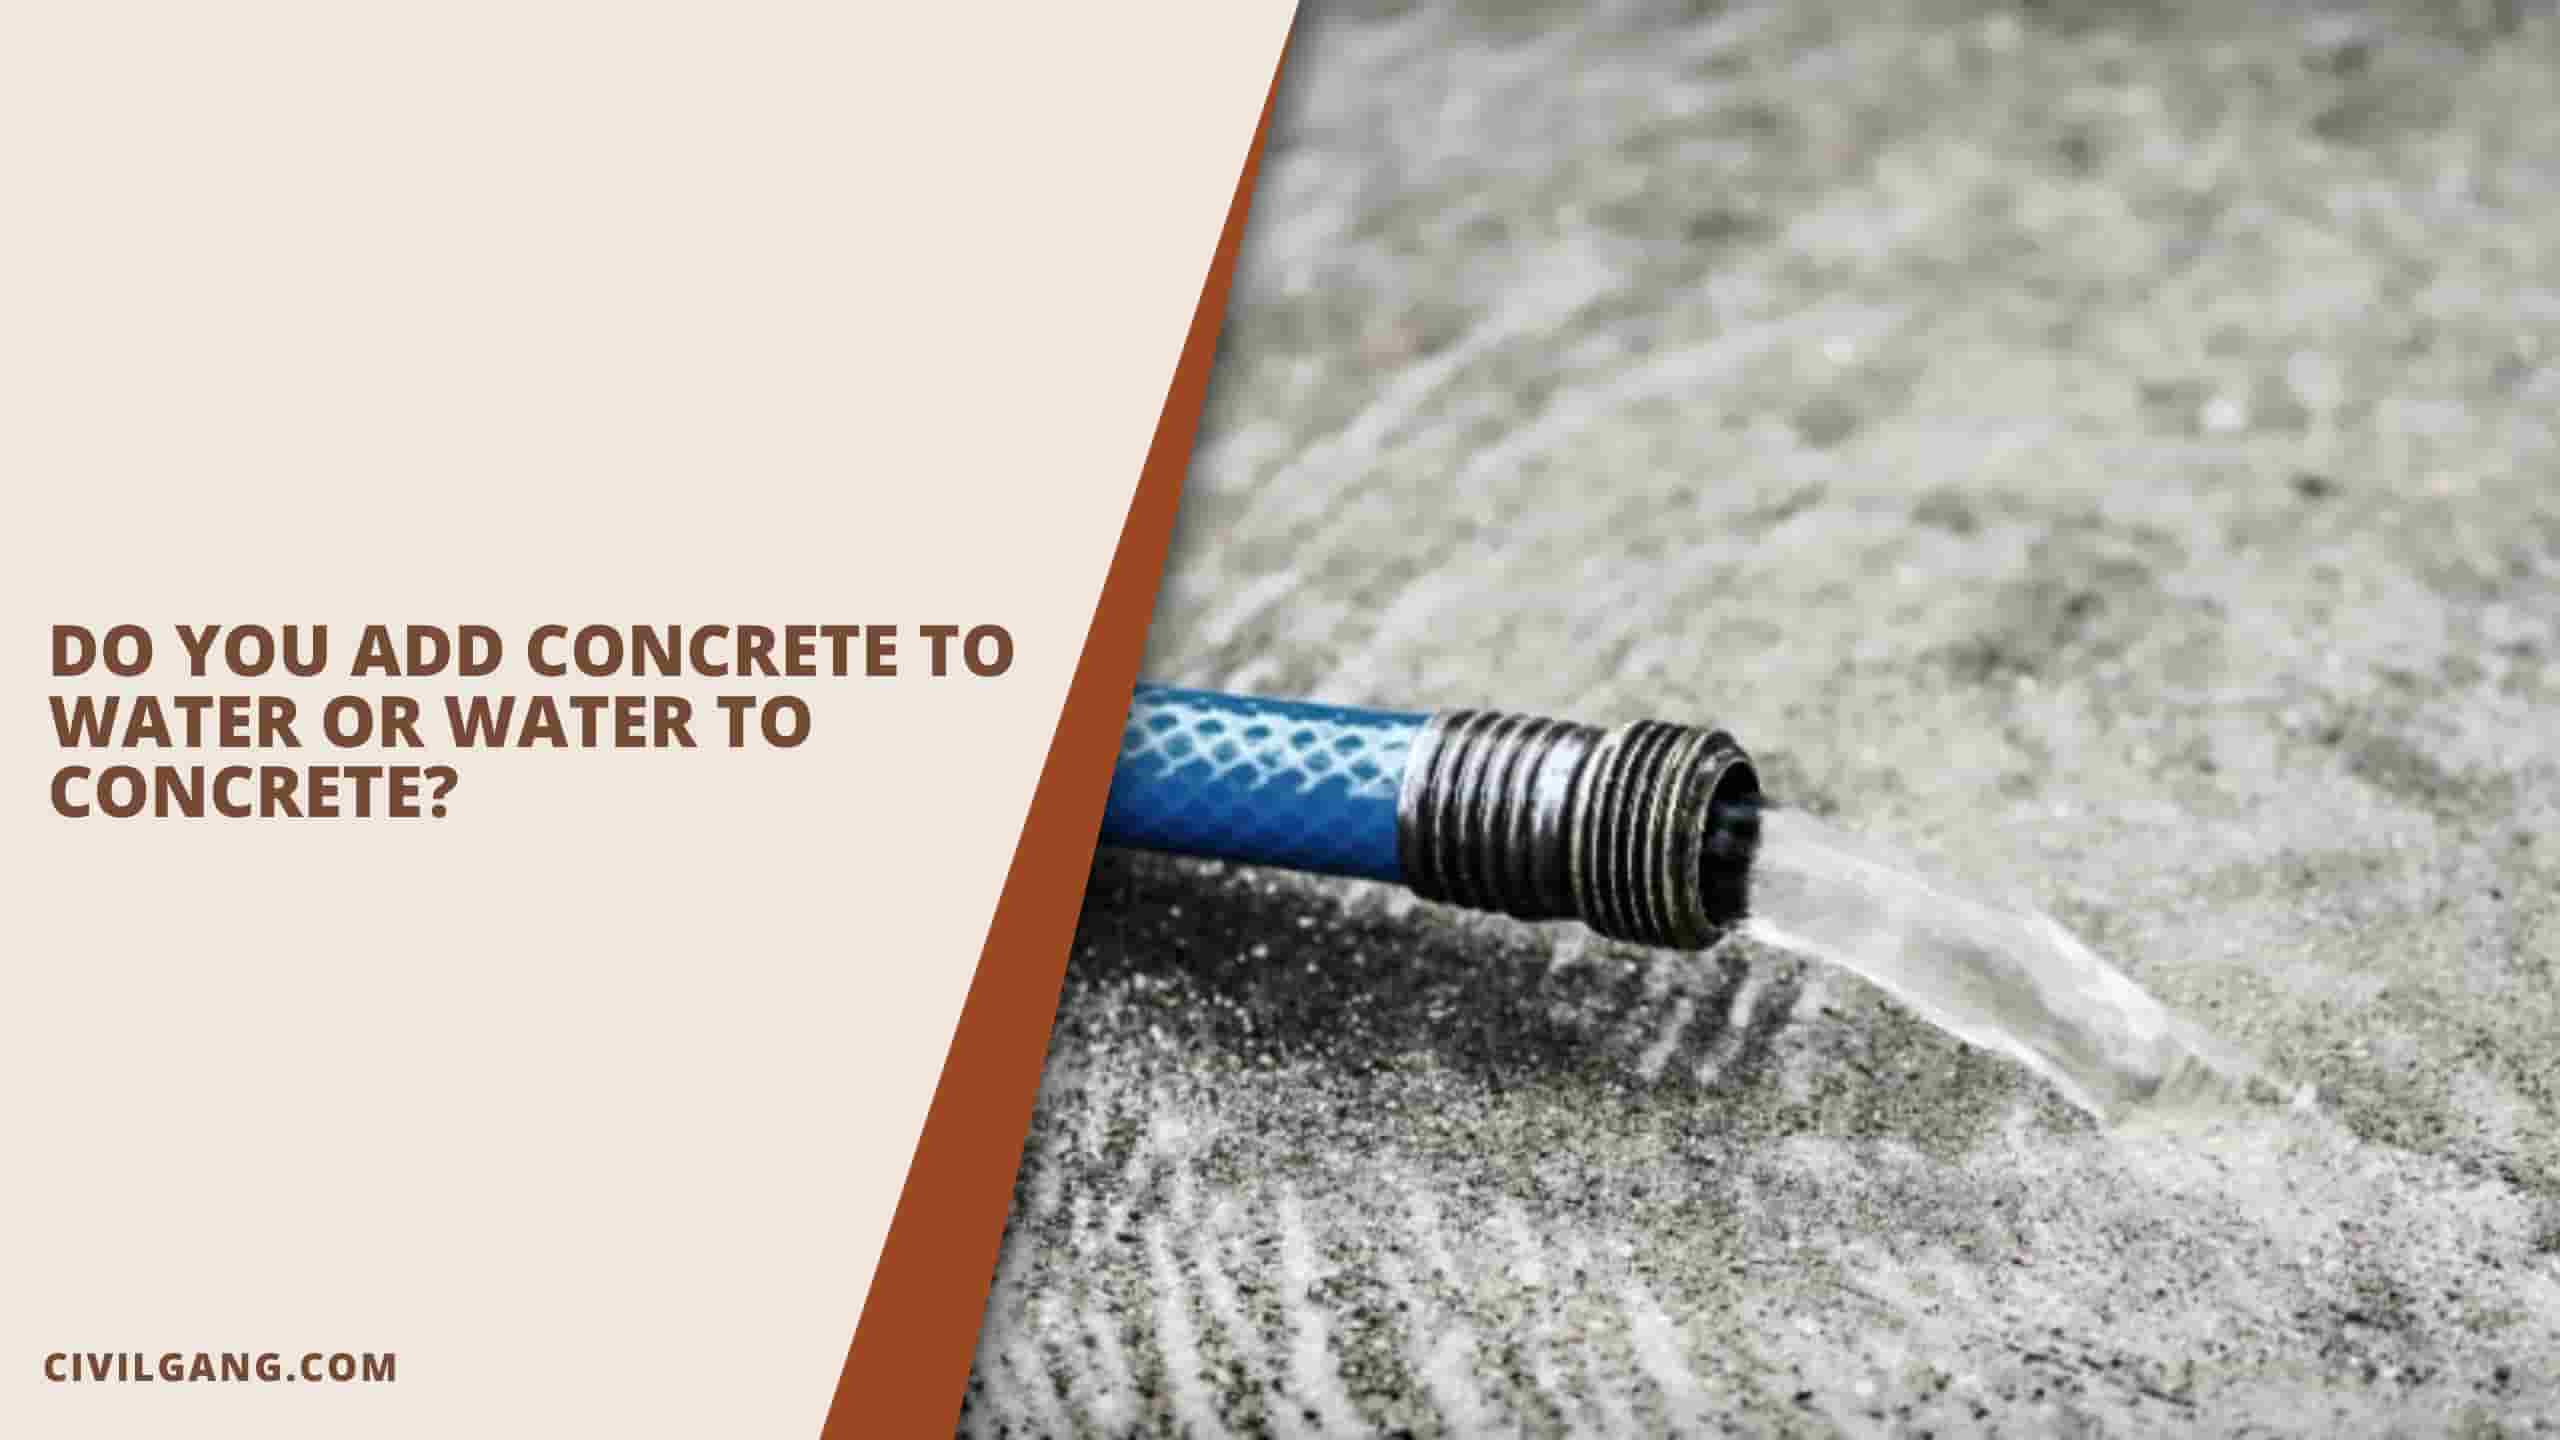 Do You Add Concrete To Water Or Water To Concrete?